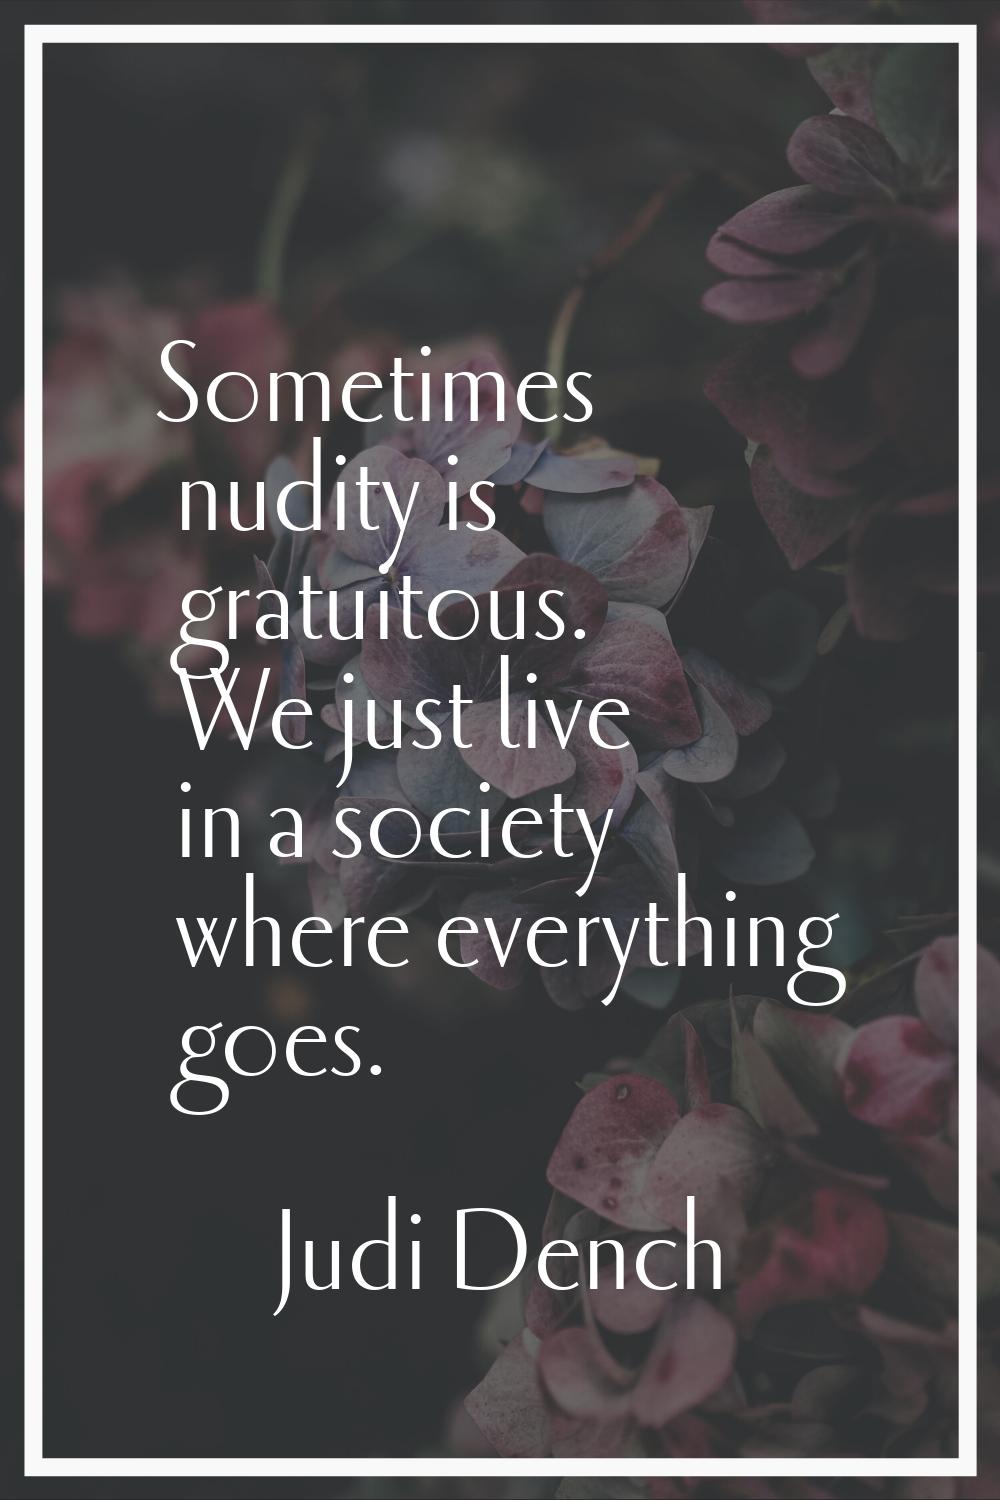 Sometimes nudity is gratuitous. We just live in a society where everything goes.